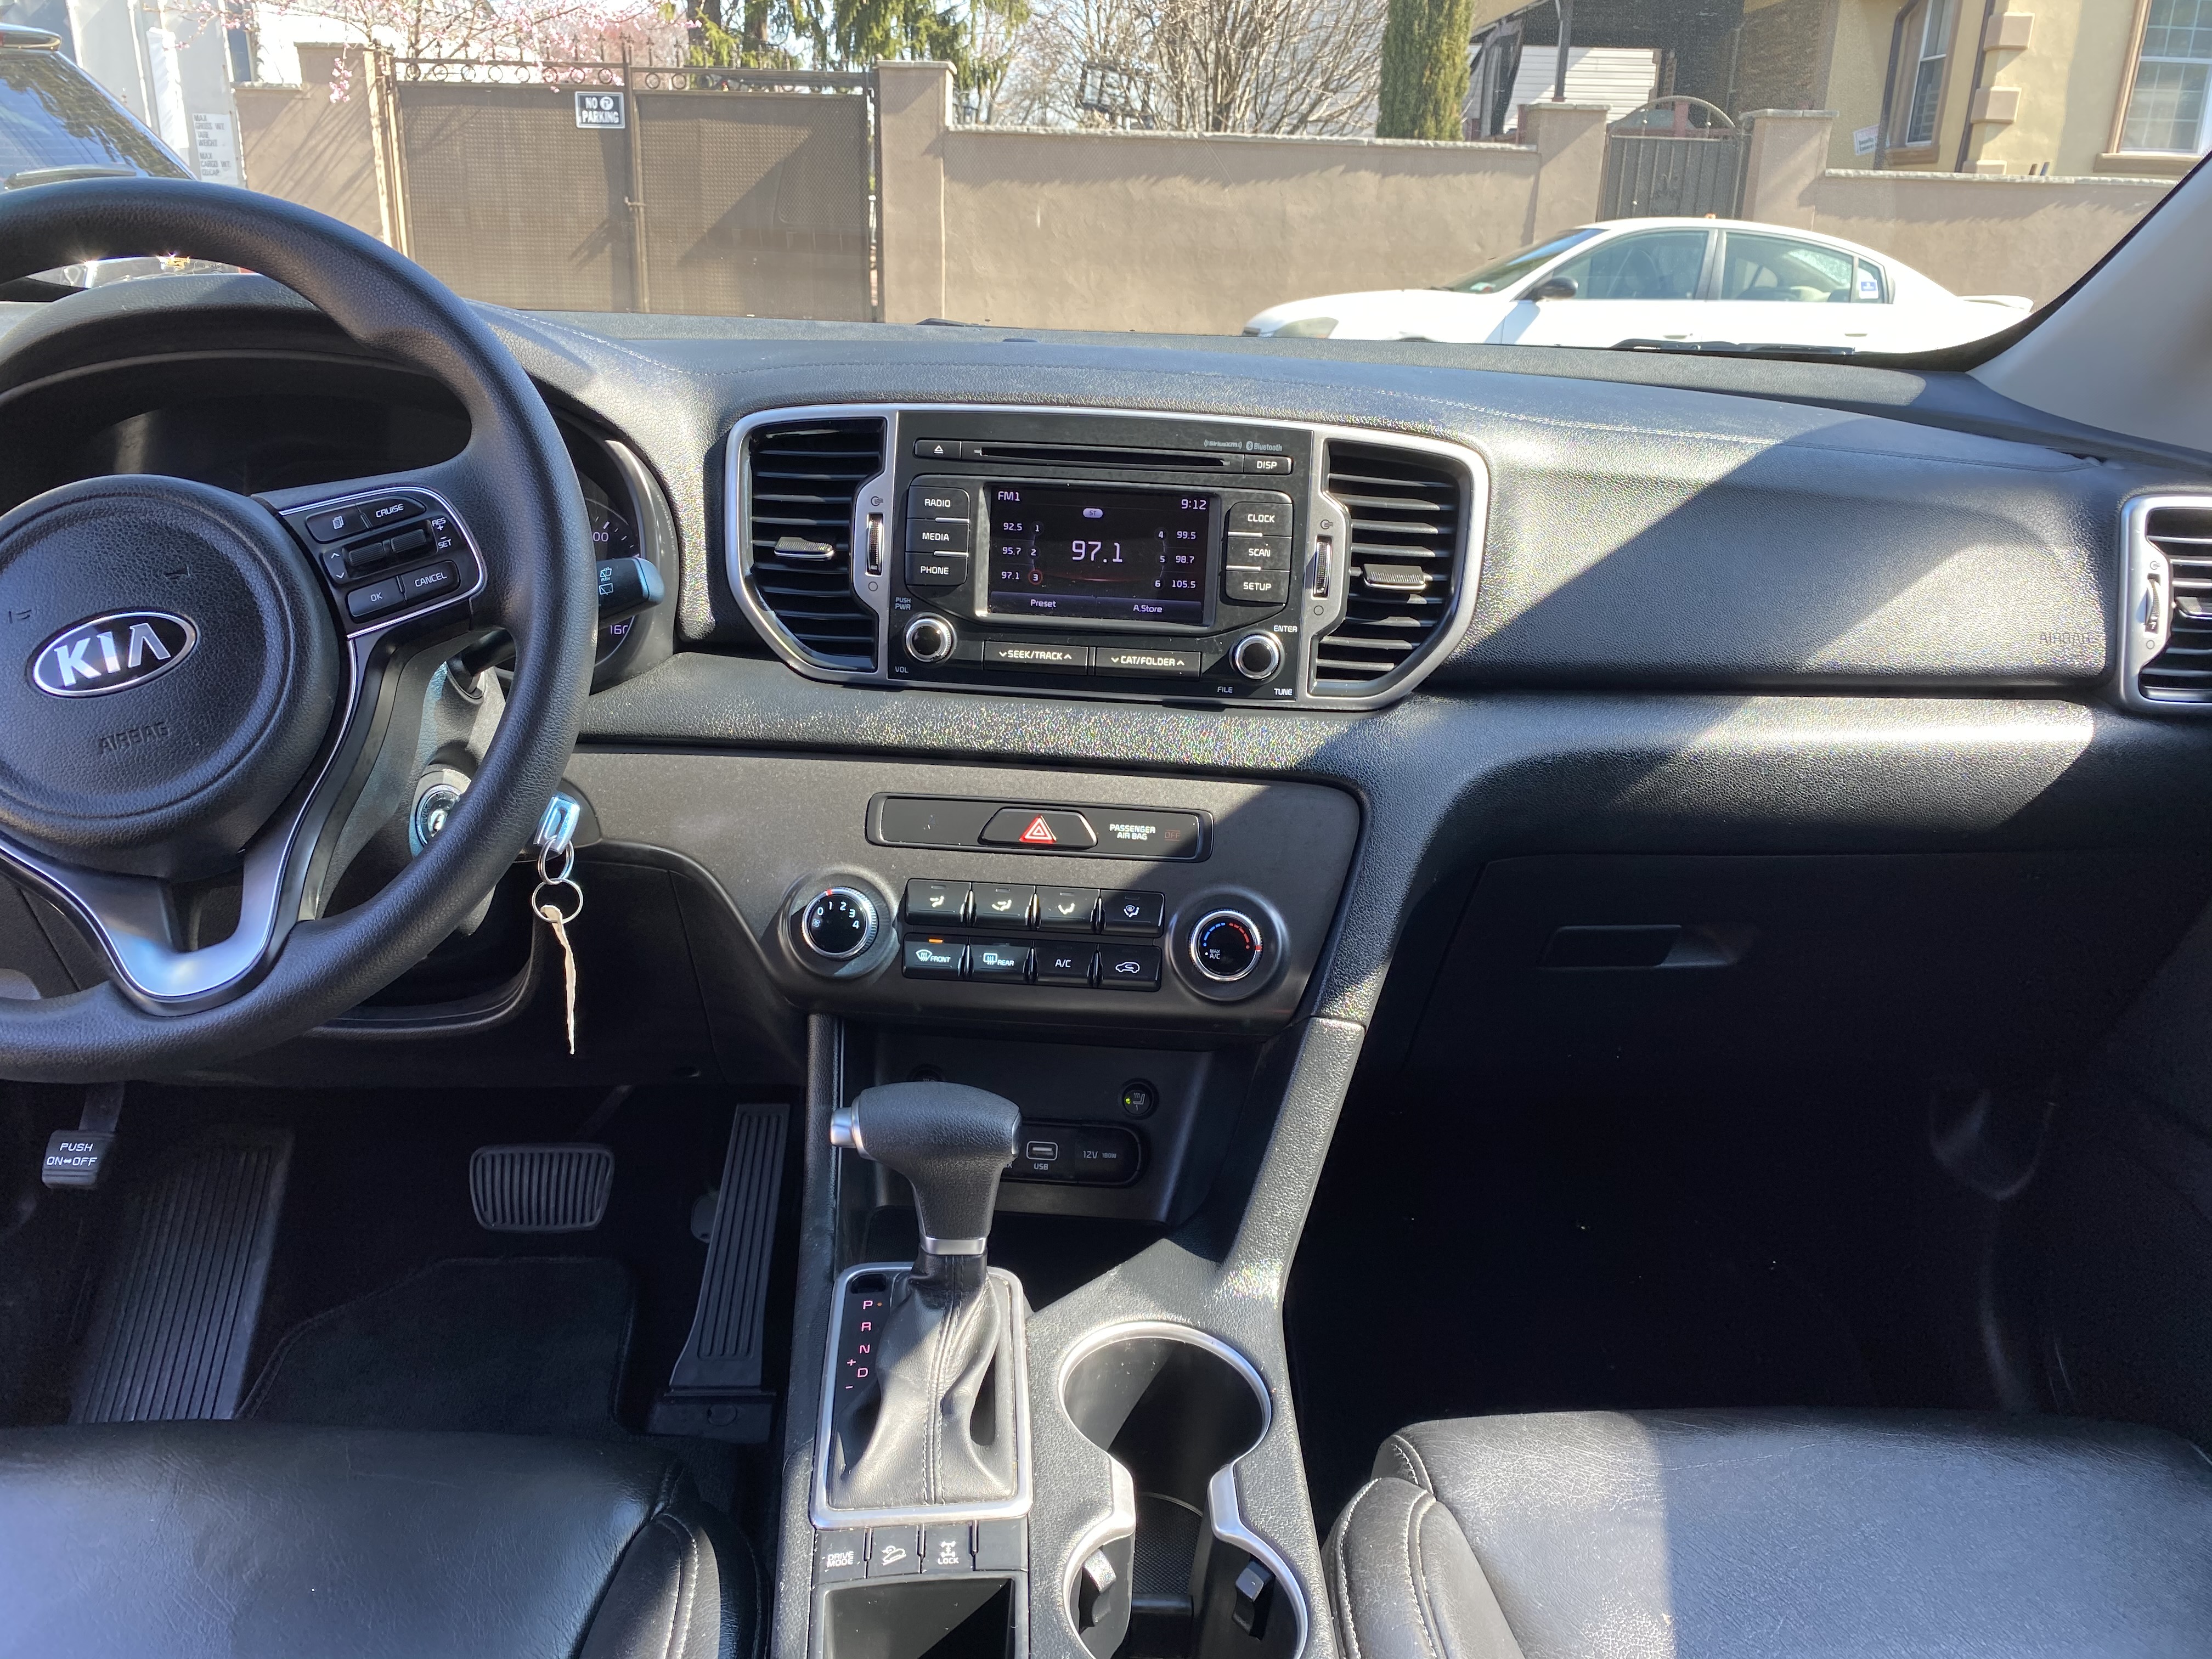 Used - Kia Sportage LX AWD SUV for sale in Staten Island NY